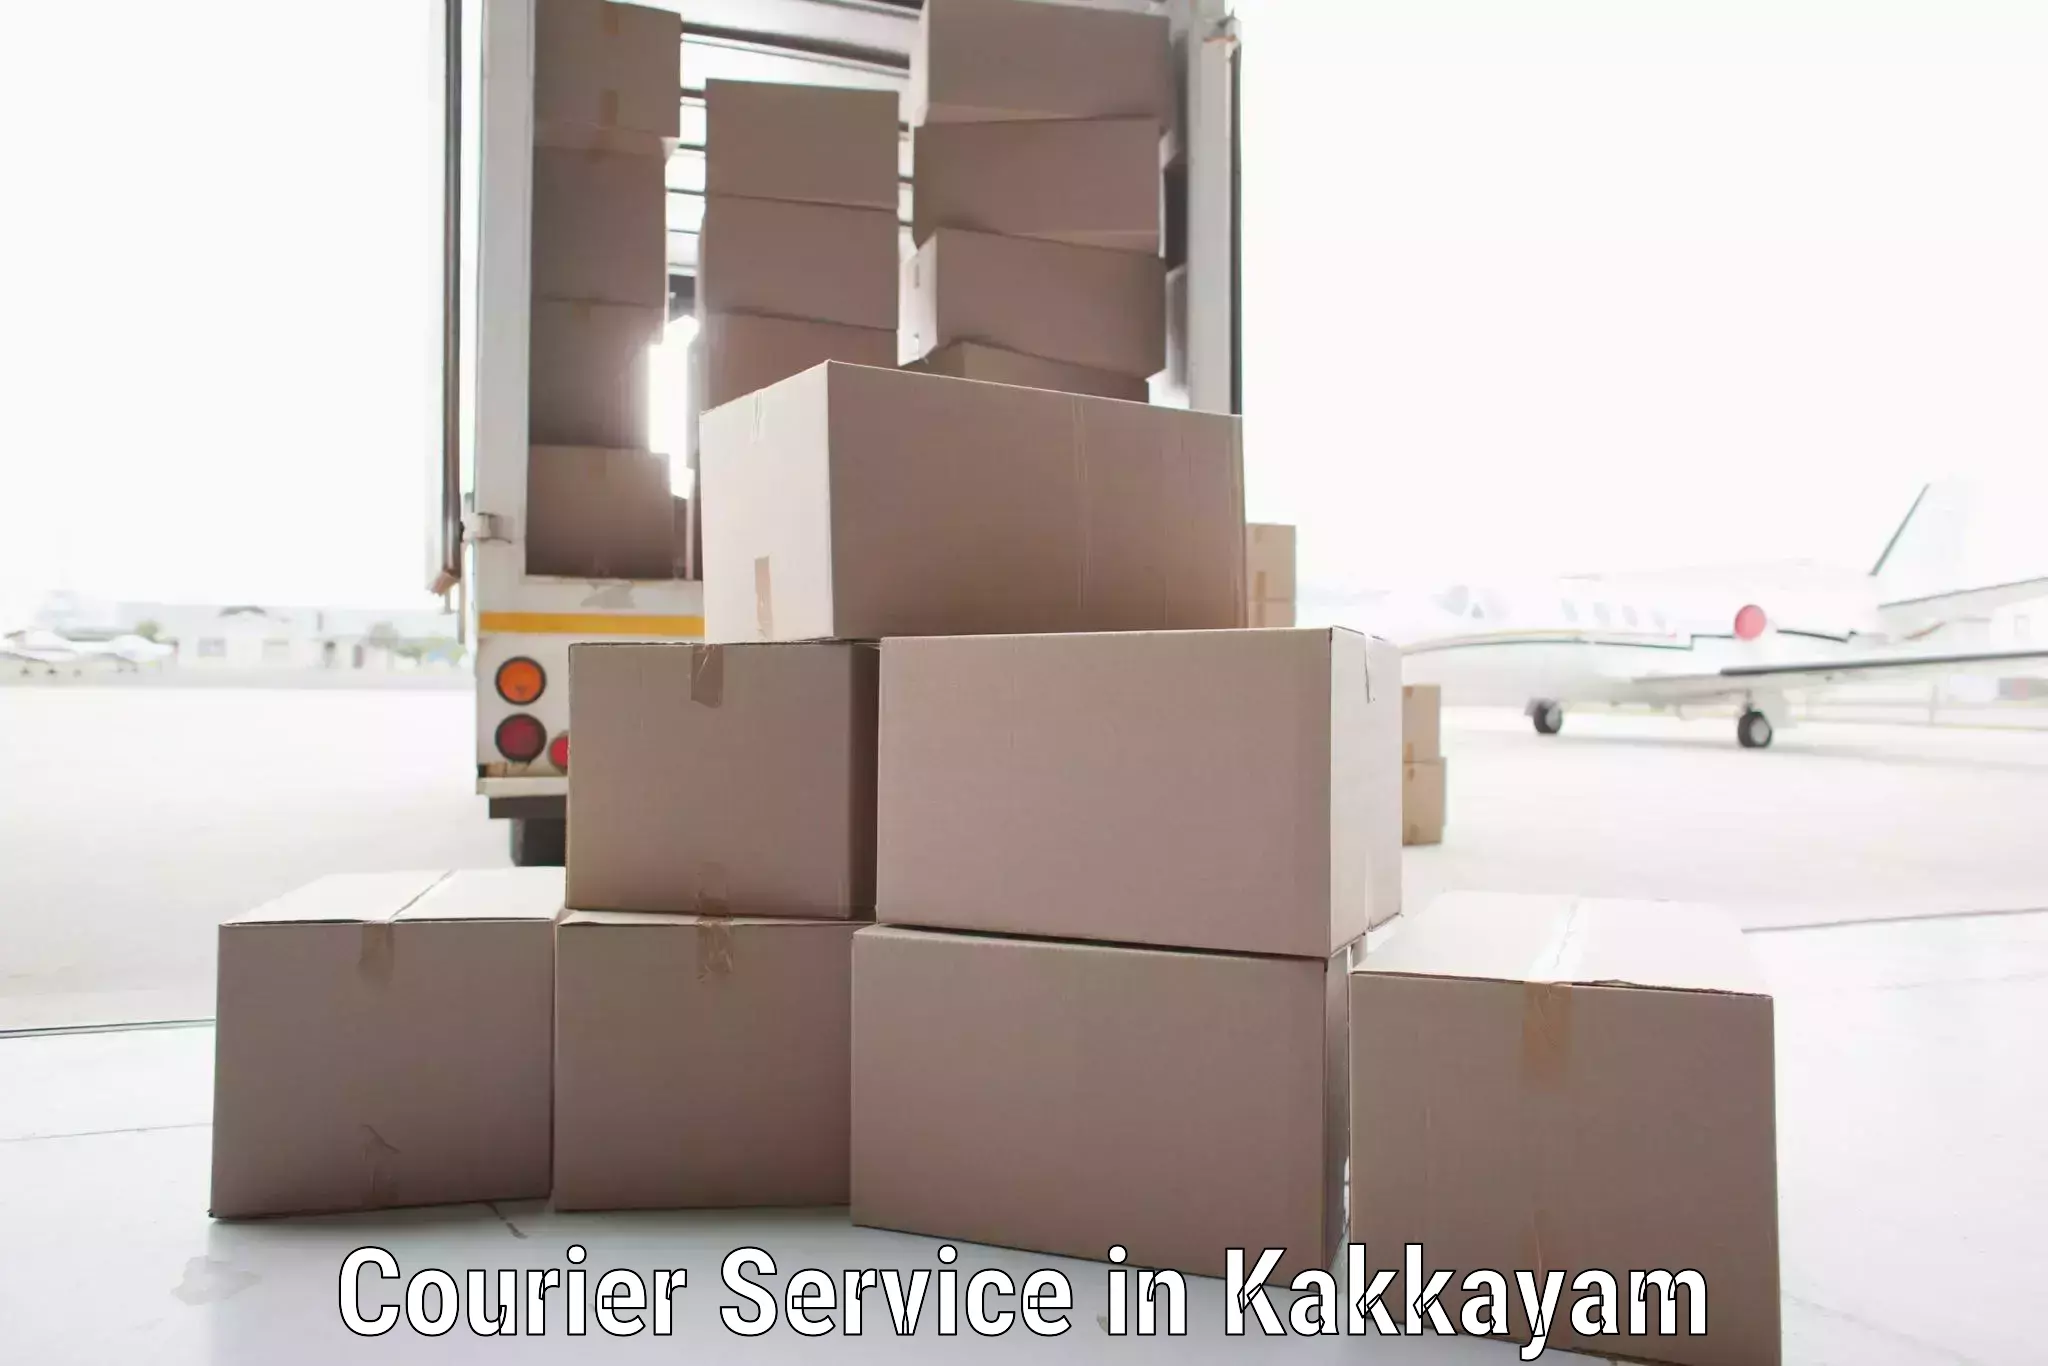 Express mail solutions in Kakkayam